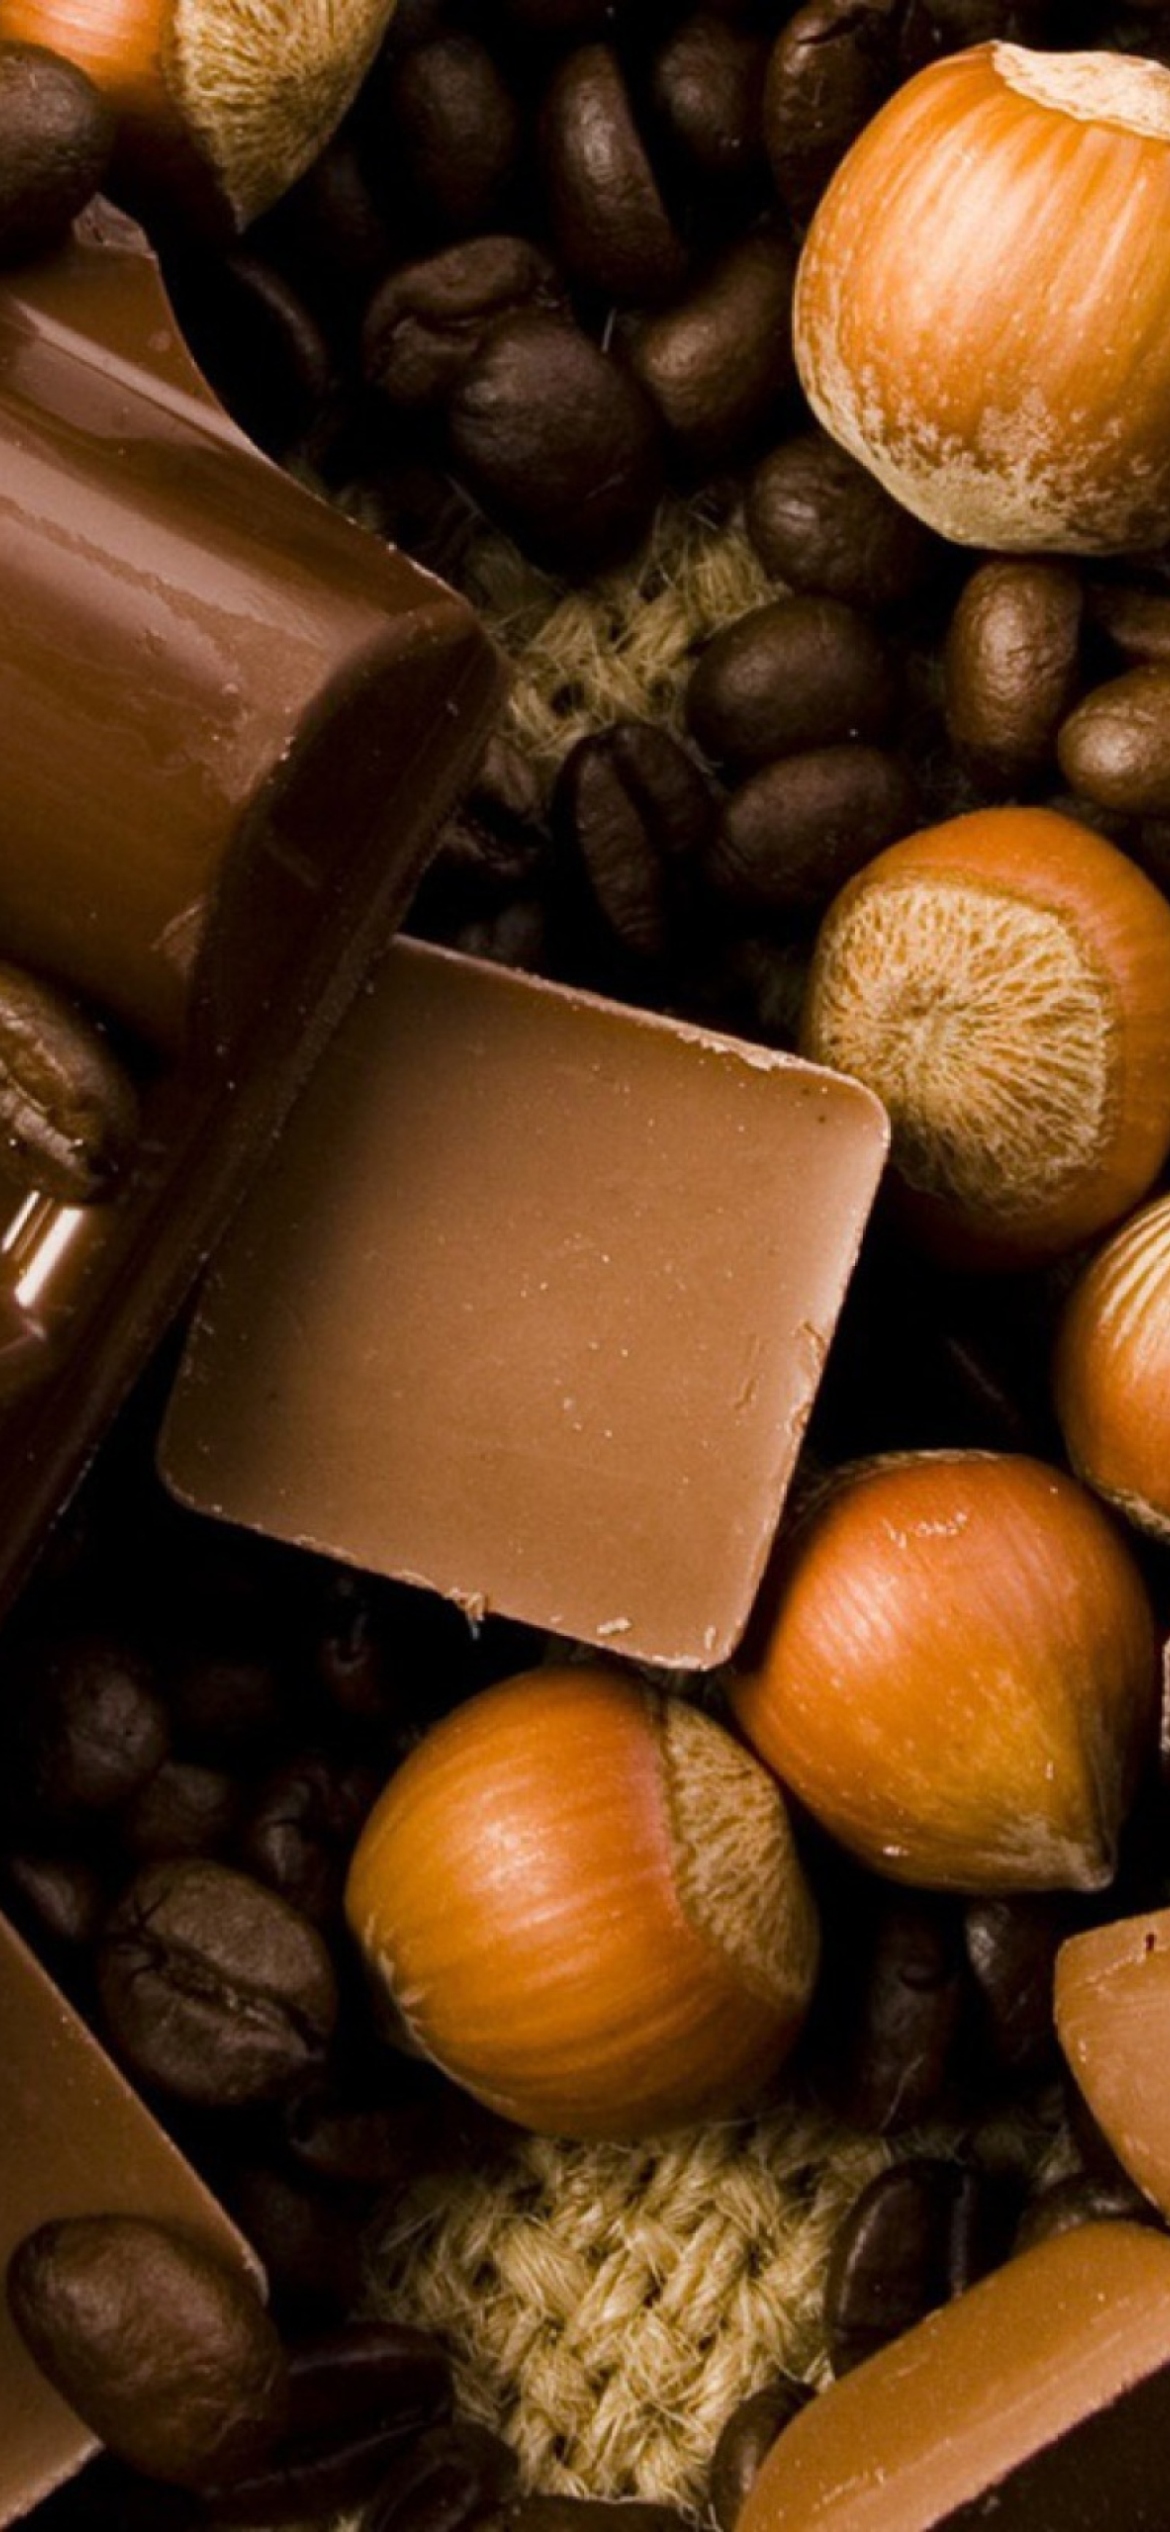 Das Chocolate, Nuts And Coffee Wallpaper 1170x2532